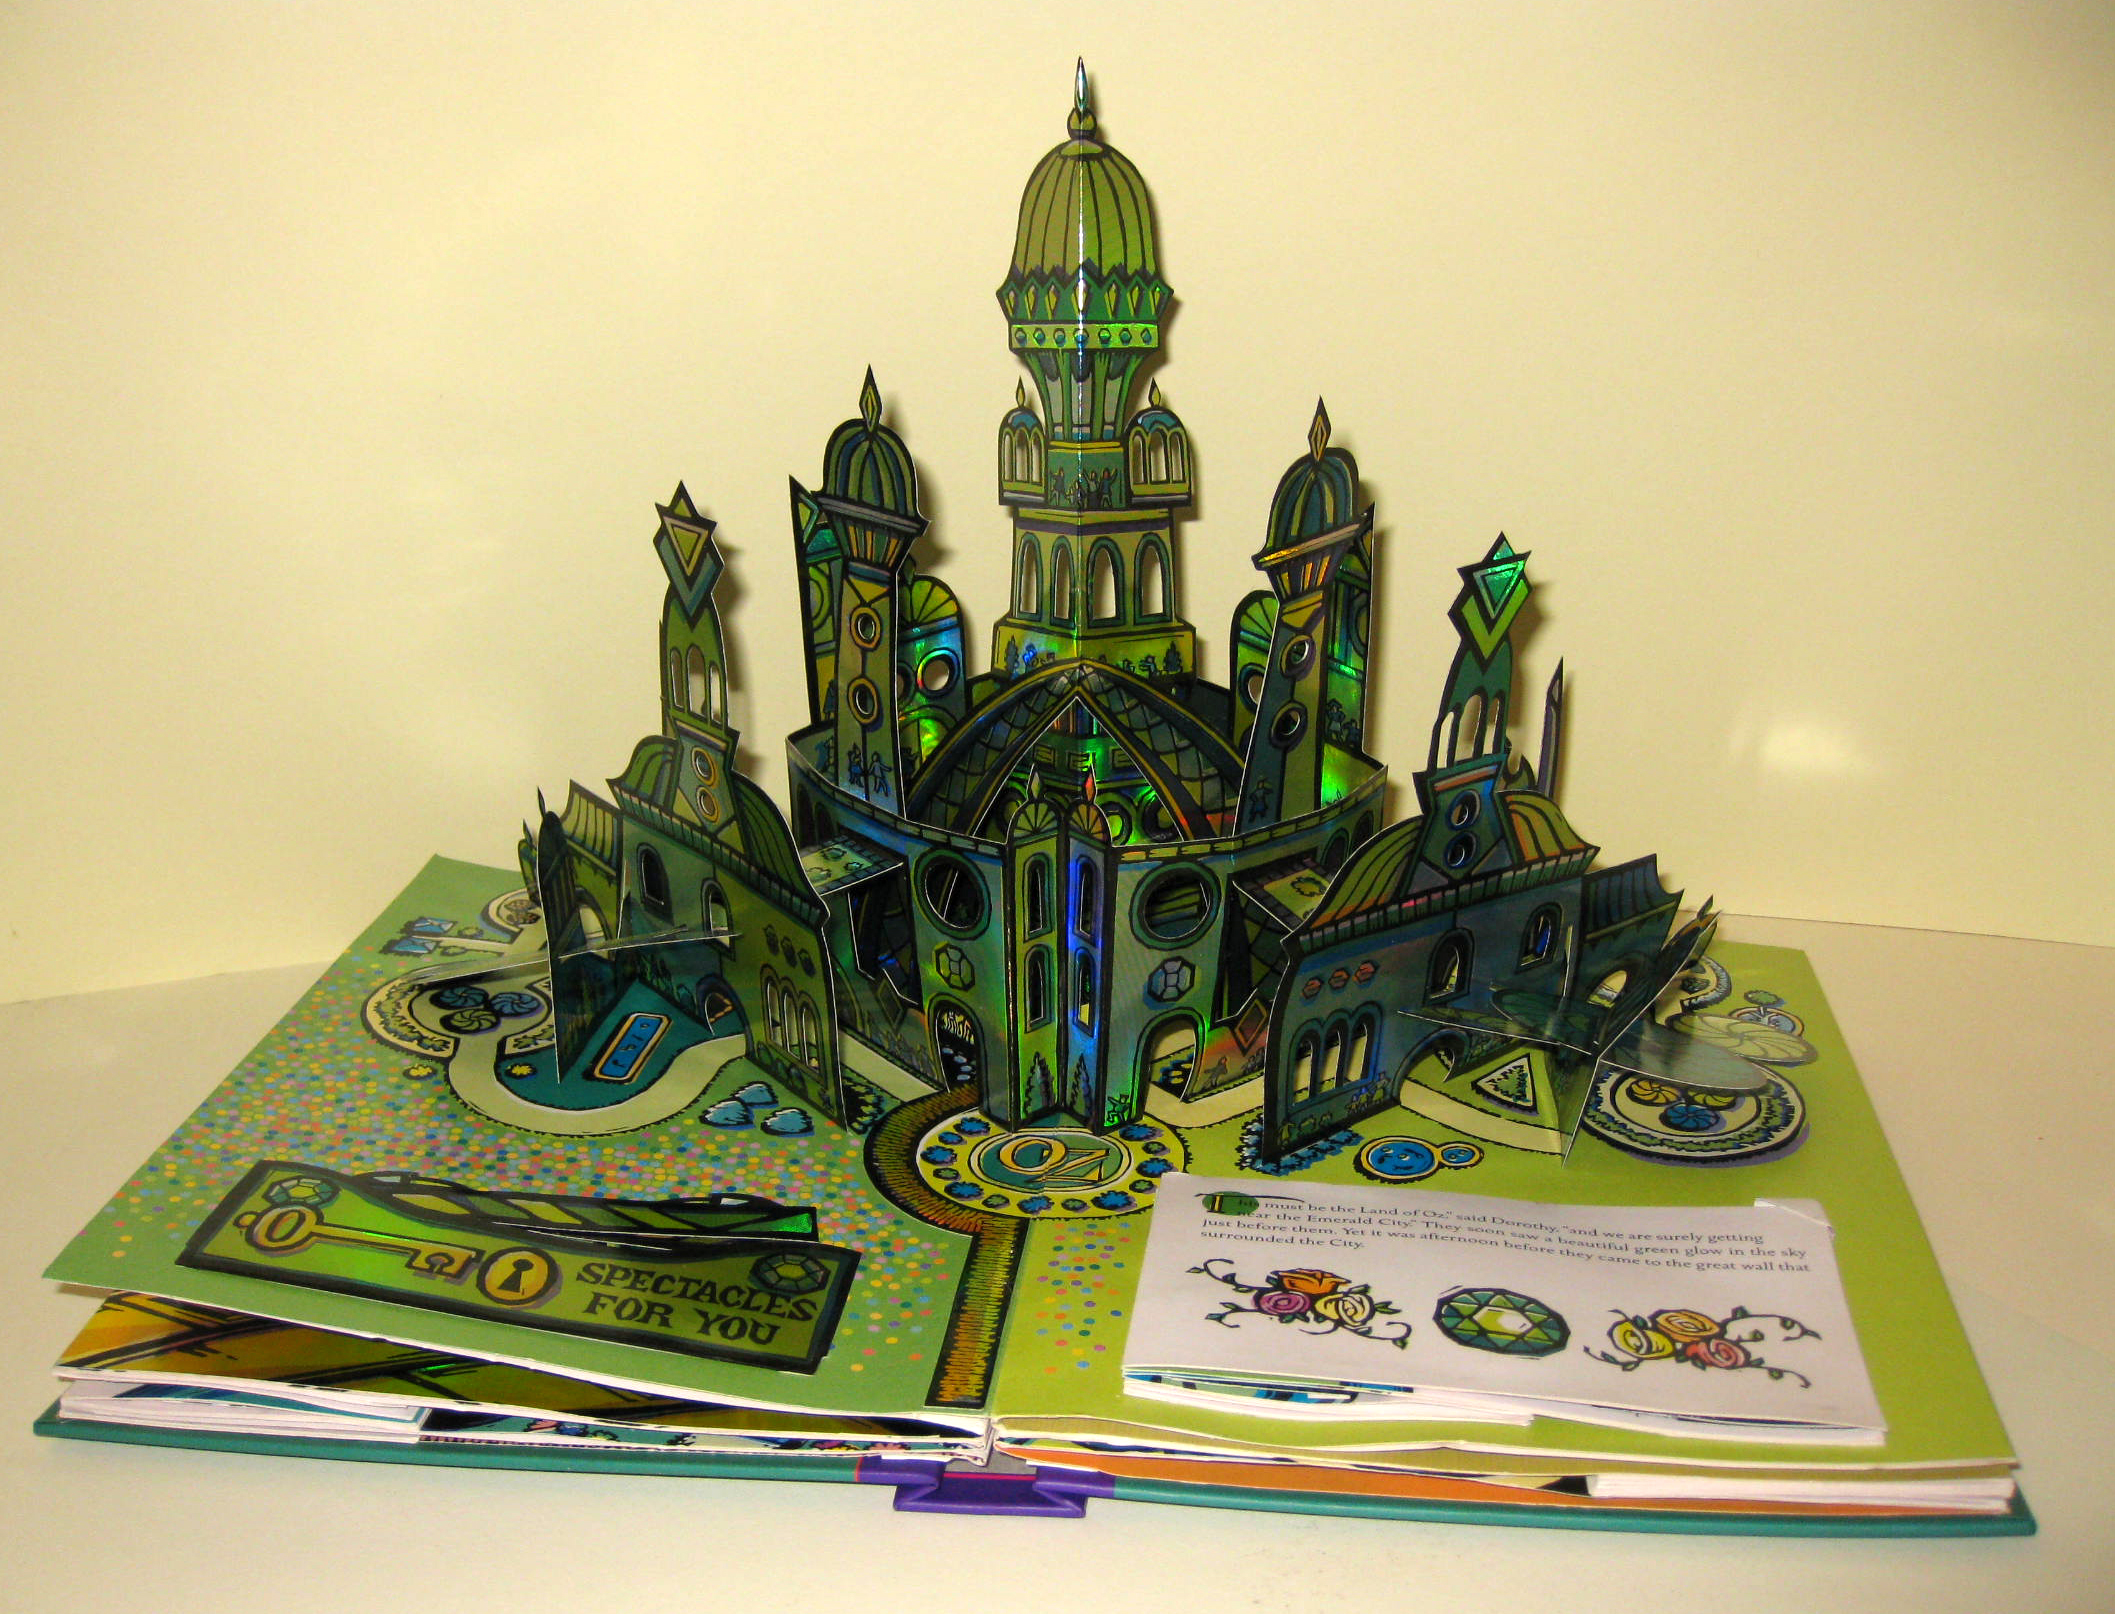 Photograph of a pop-up book. The book is open to to green spread, from which arises a number of green buildings and towers to construct the Emerald City from the Wonderful Wizard of Oz.